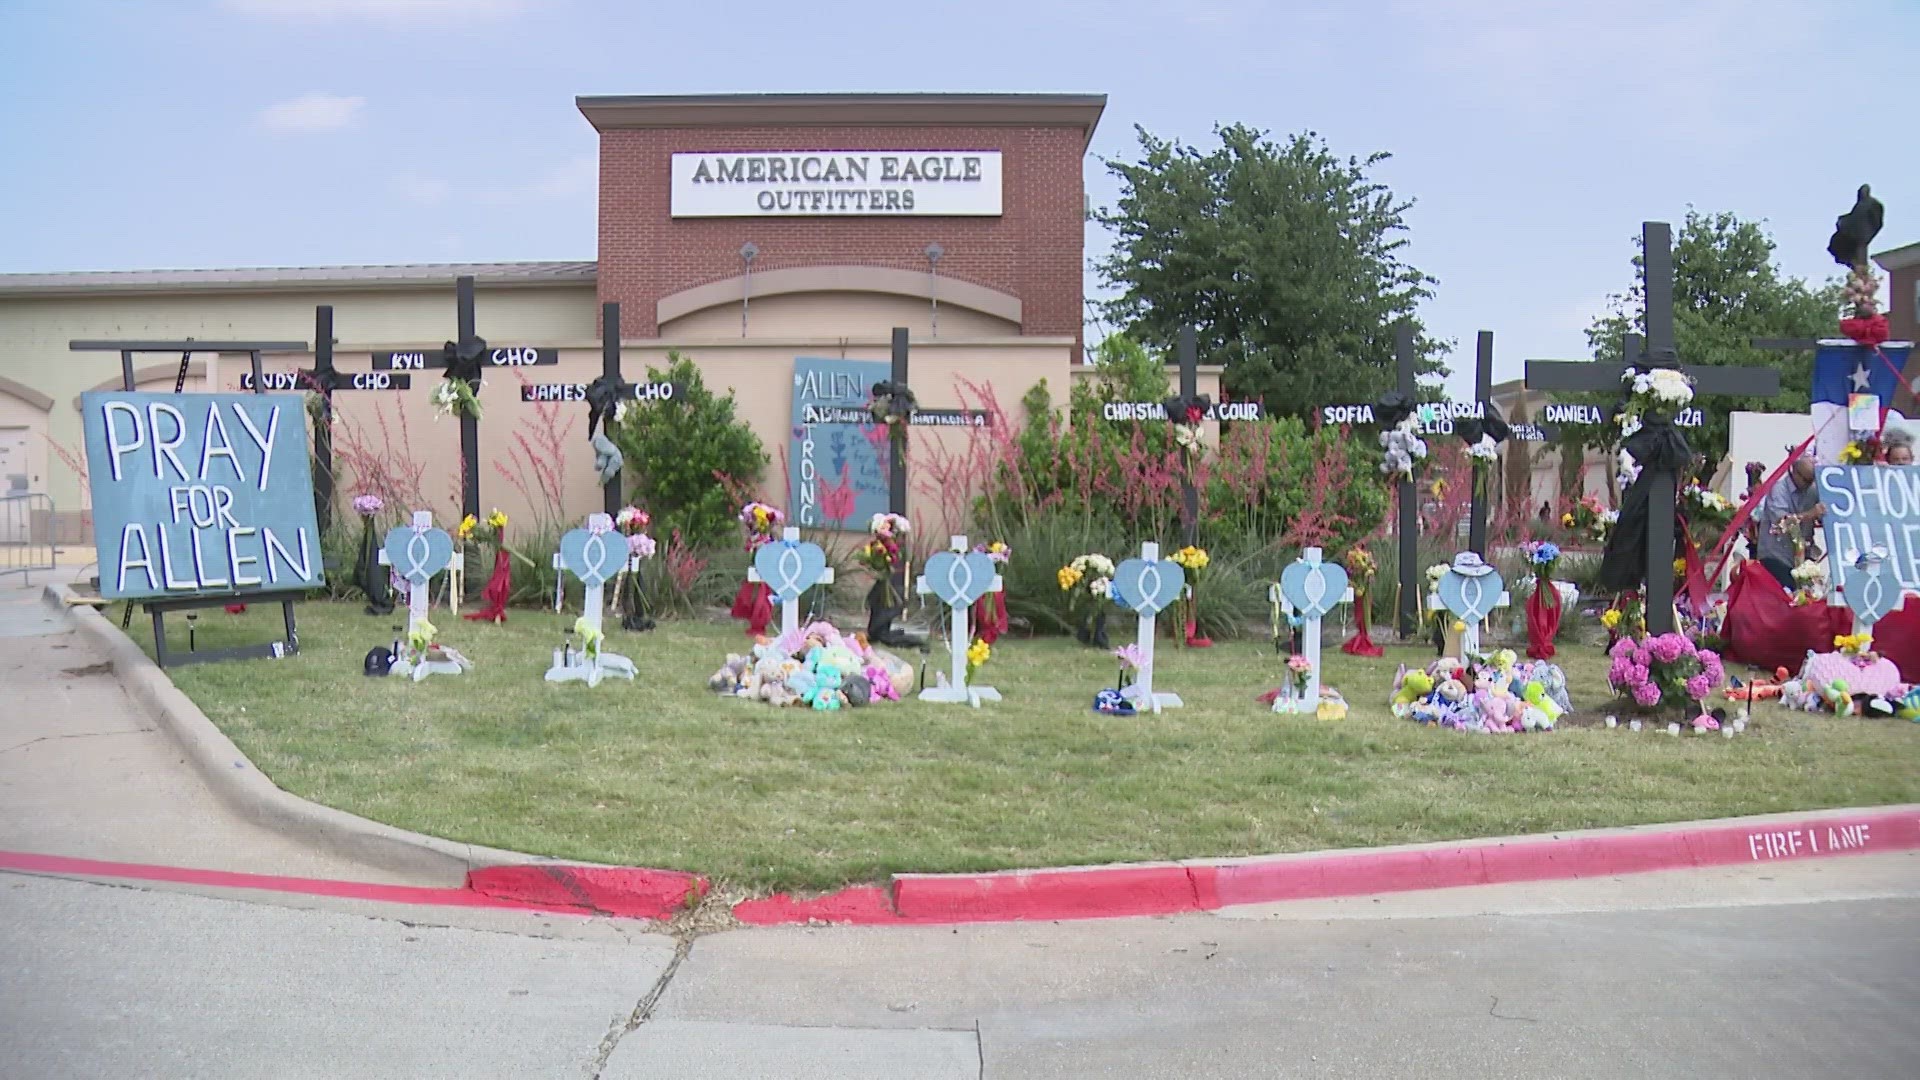 From sadness to anger, mourners' emotions ran high at a growing memorial outside the Allen Premium Outlets.